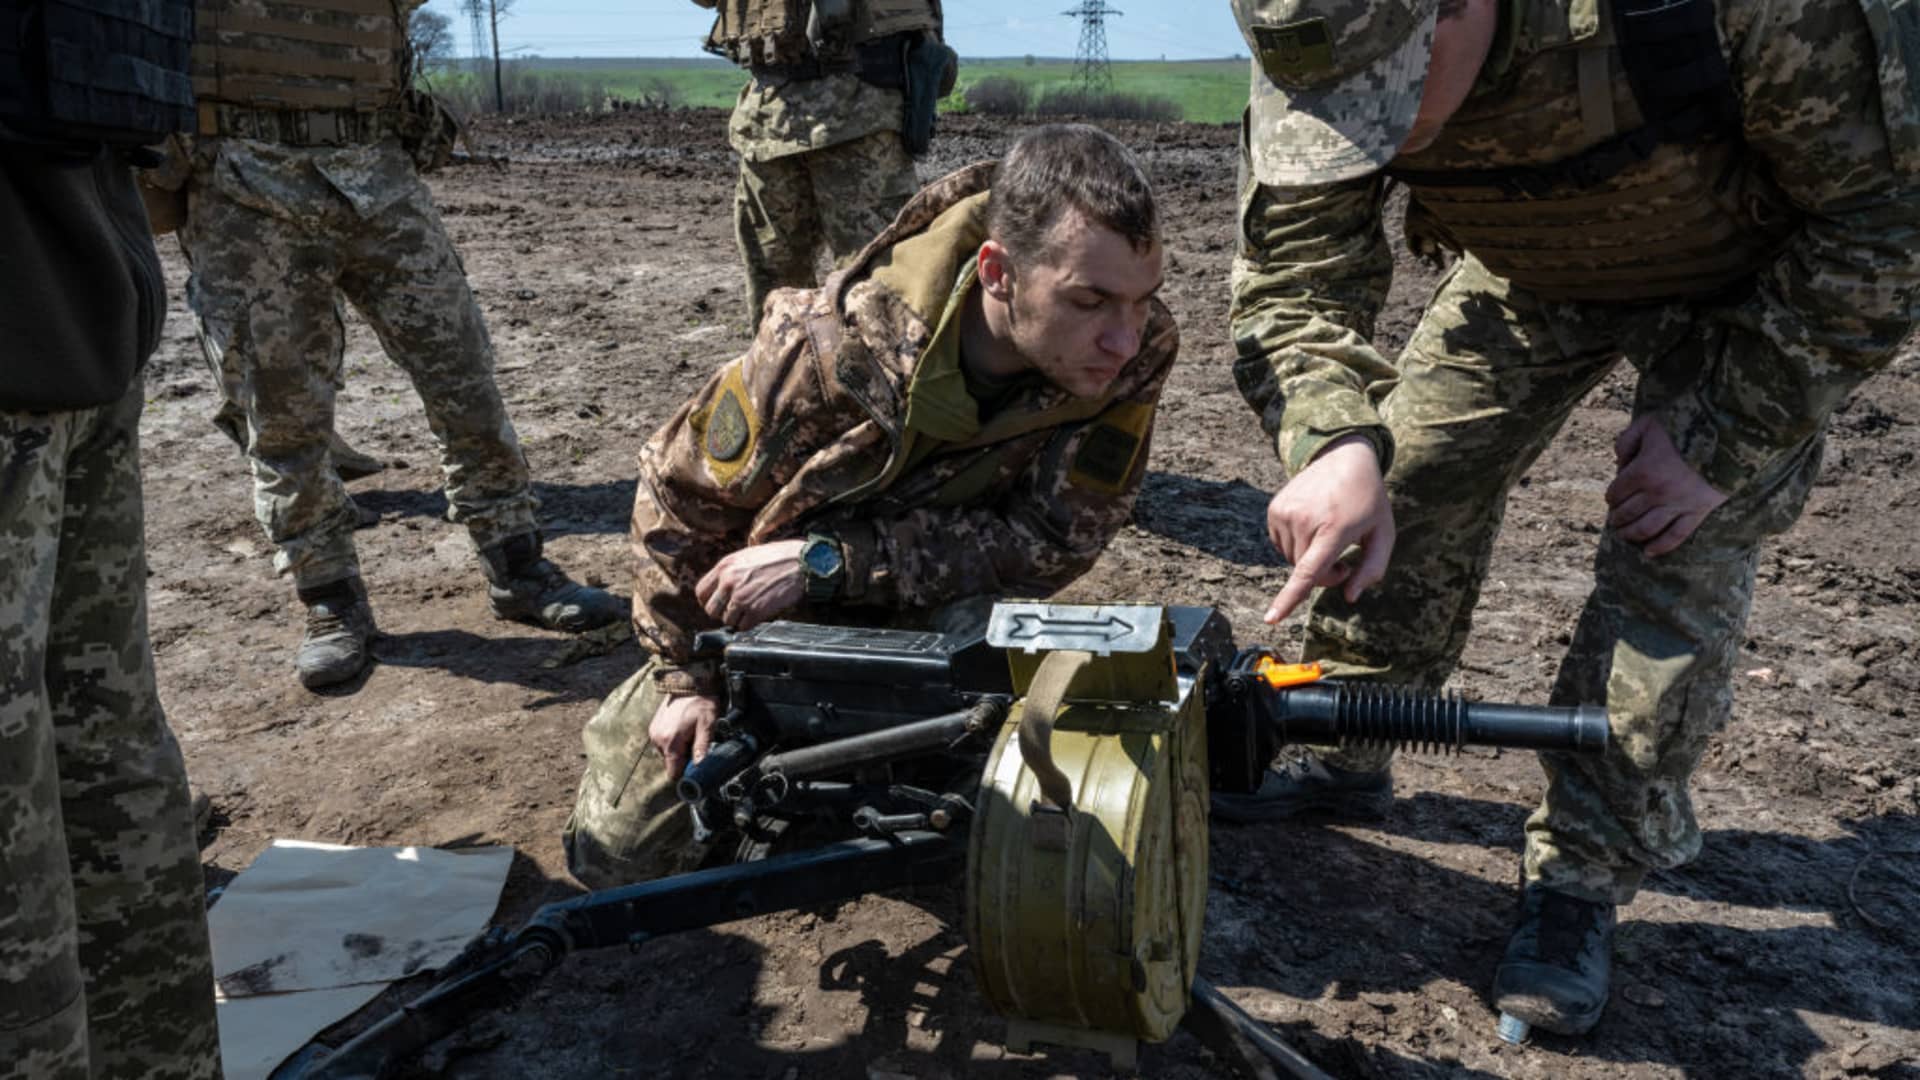 Ukrainian soldiers from the 28th Brigade practice using Soviet-made AGS-17 automatic grenade launchers, as Ukrainian Armed Forces units train for a critical and imminent spring counteroffensive against Russian troops, which invaded 14 months earlier, in the Donbas region, Ukraine, on April 26, 2023.